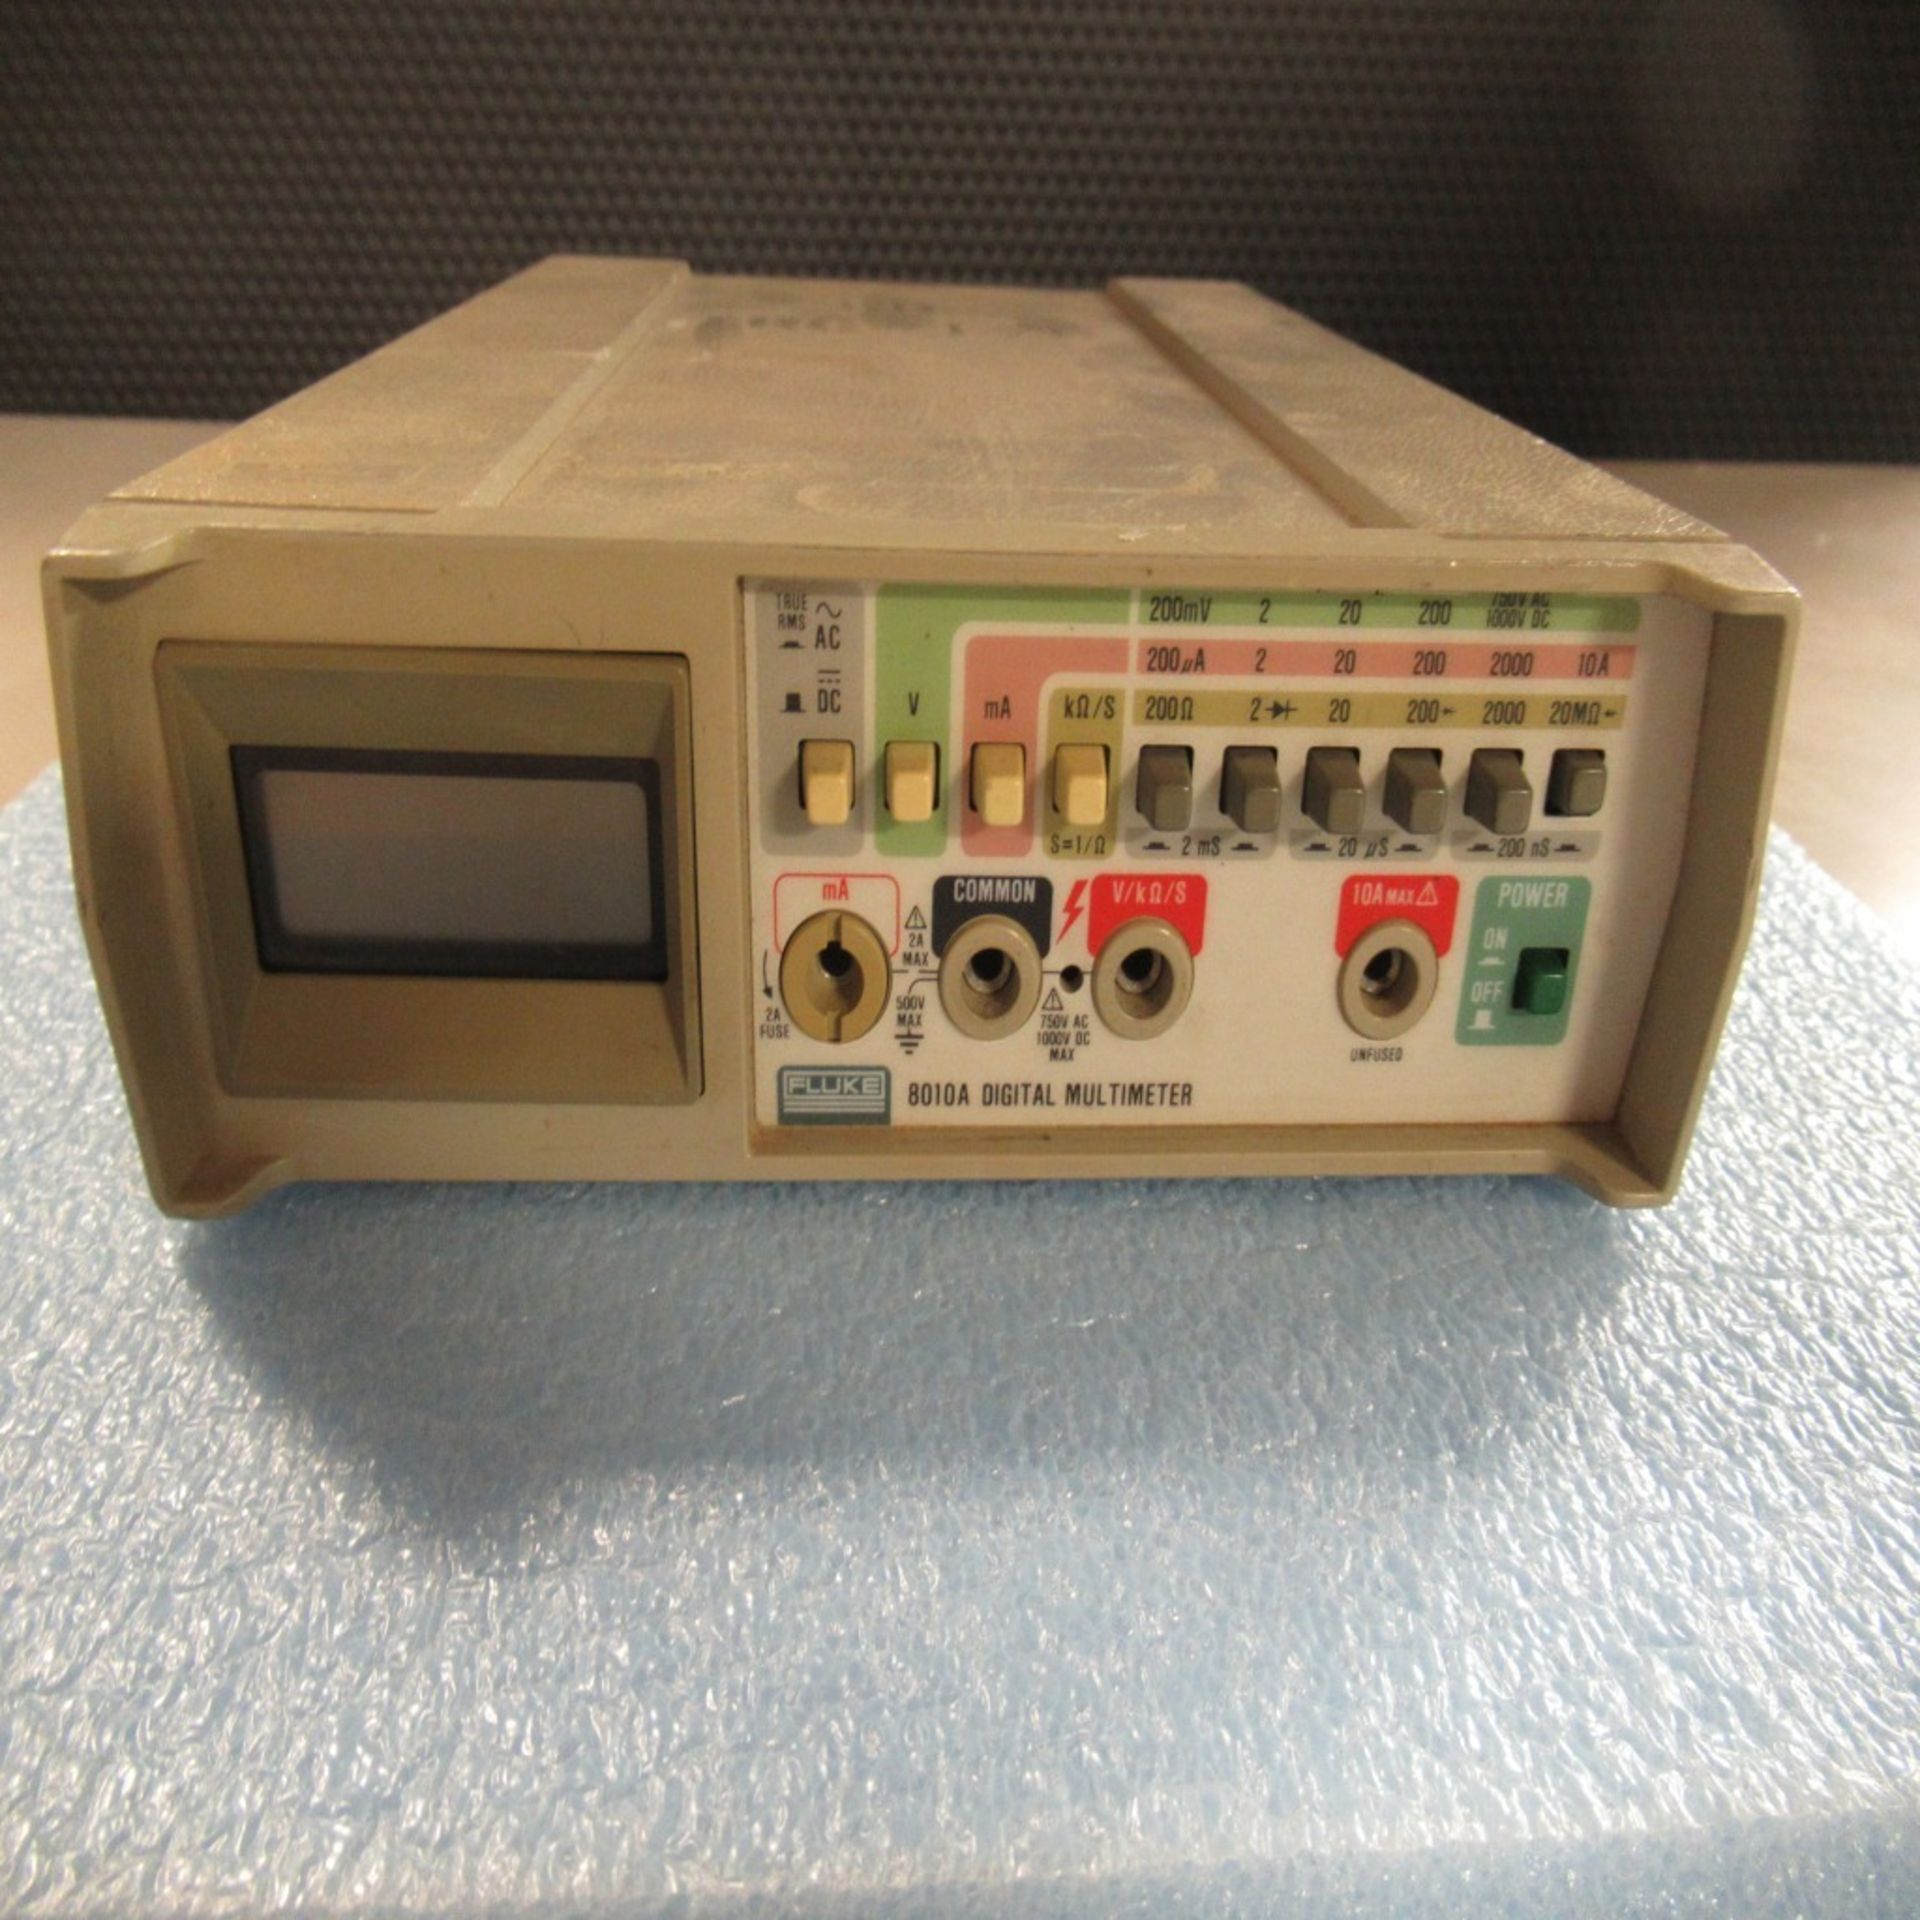 PHOTON SNAP SHOT MODEL 6000 *POWERS ON* NO SCREEN DISPLAY; FARNELL AP20-80 REGULATED POWER SUPPLY * - Image 182 of 222